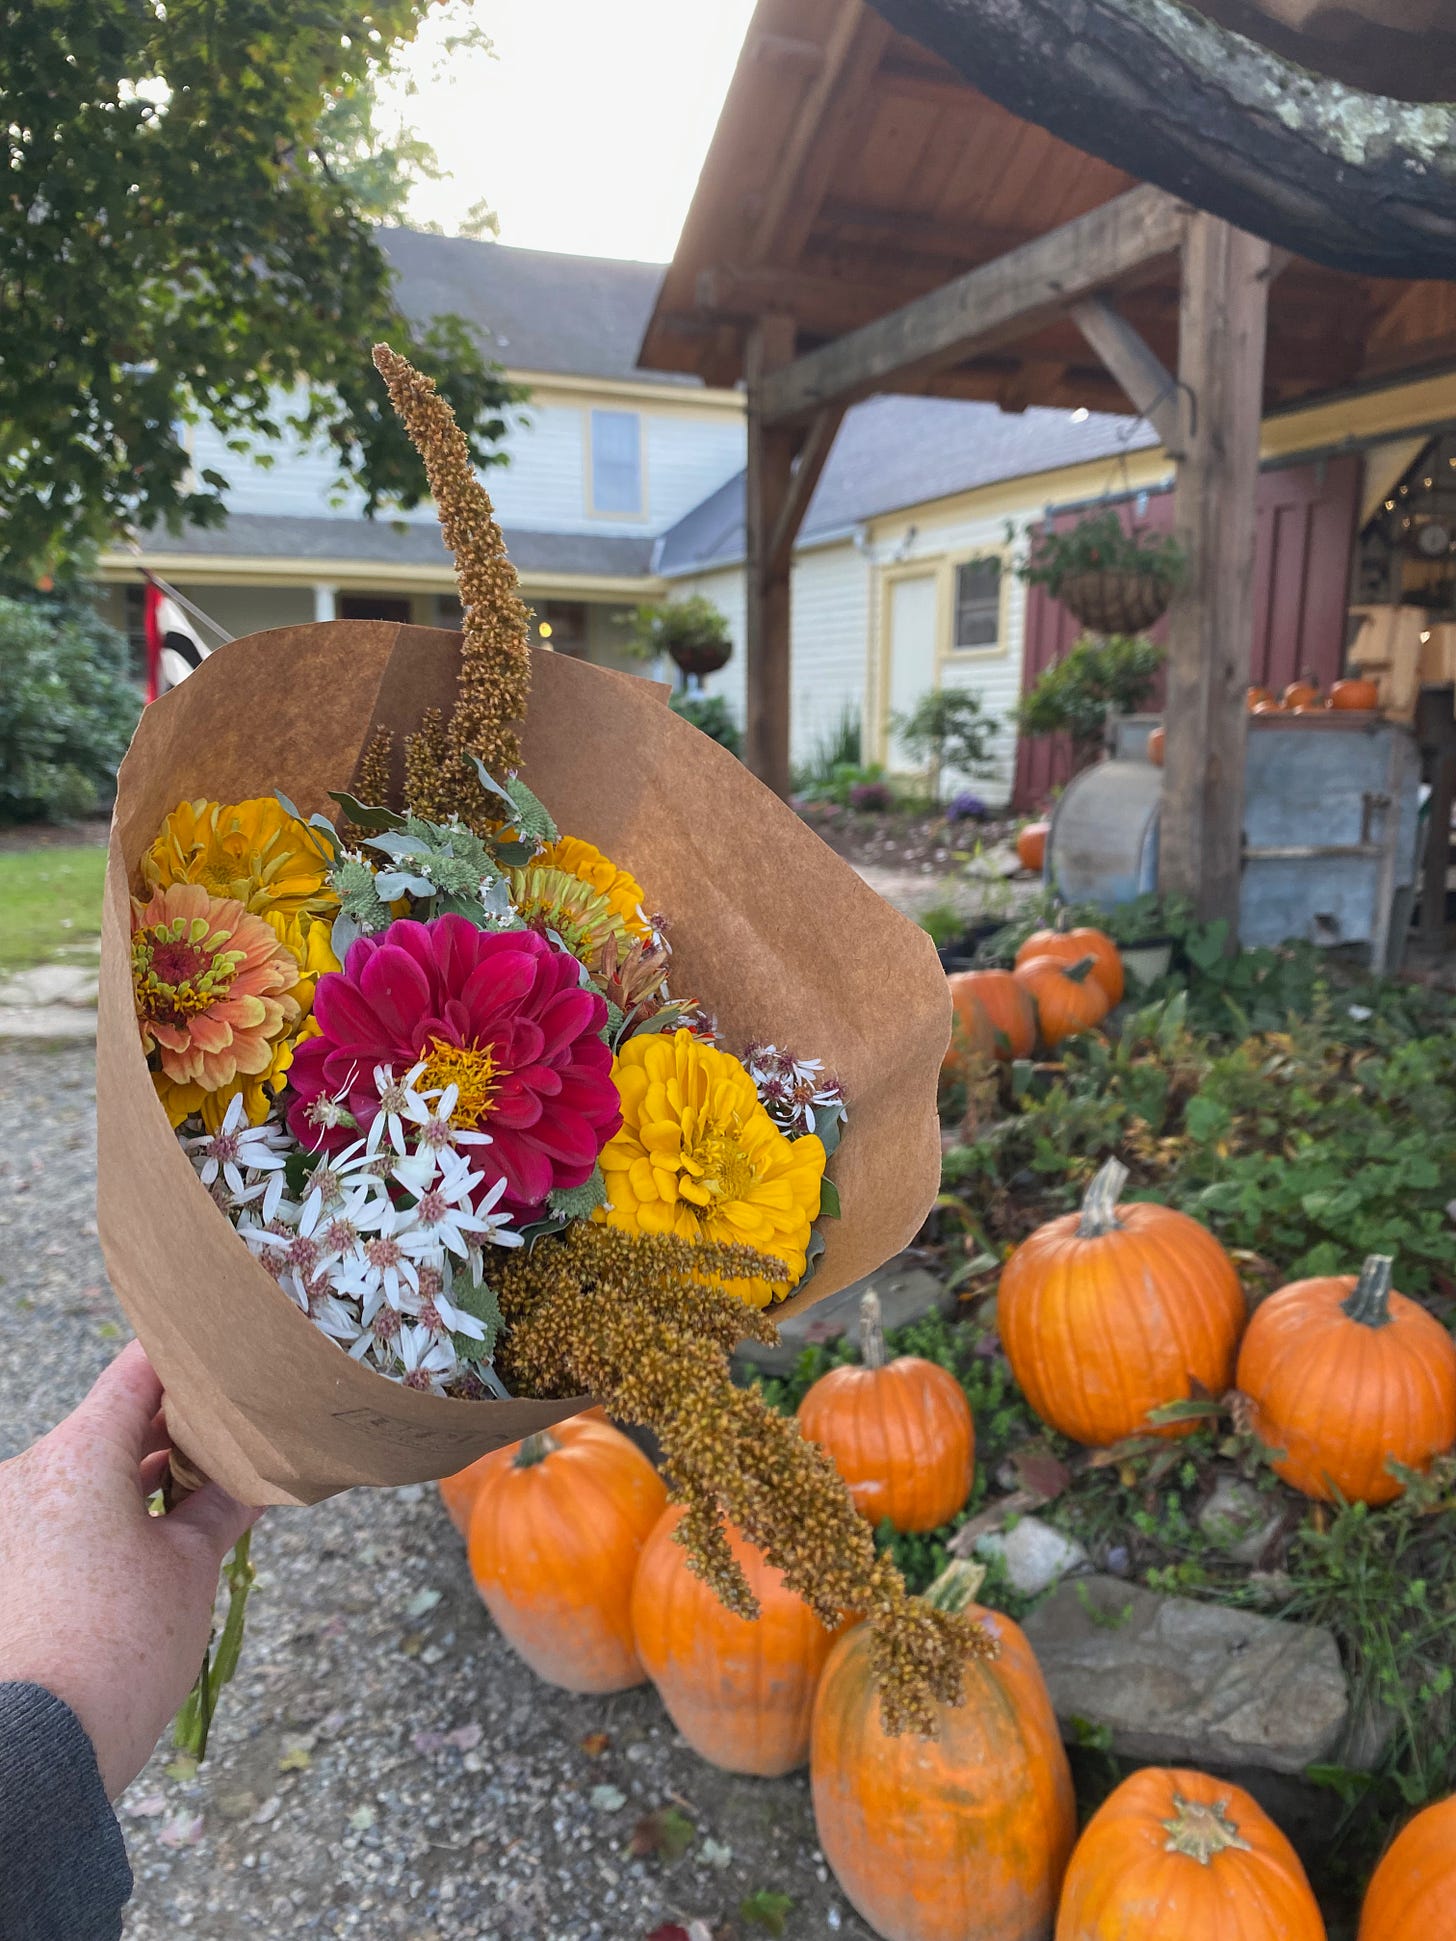 I’m holding up a sunset-colored bouqet of flowers in front of a farmstand porch full of pumpkins.